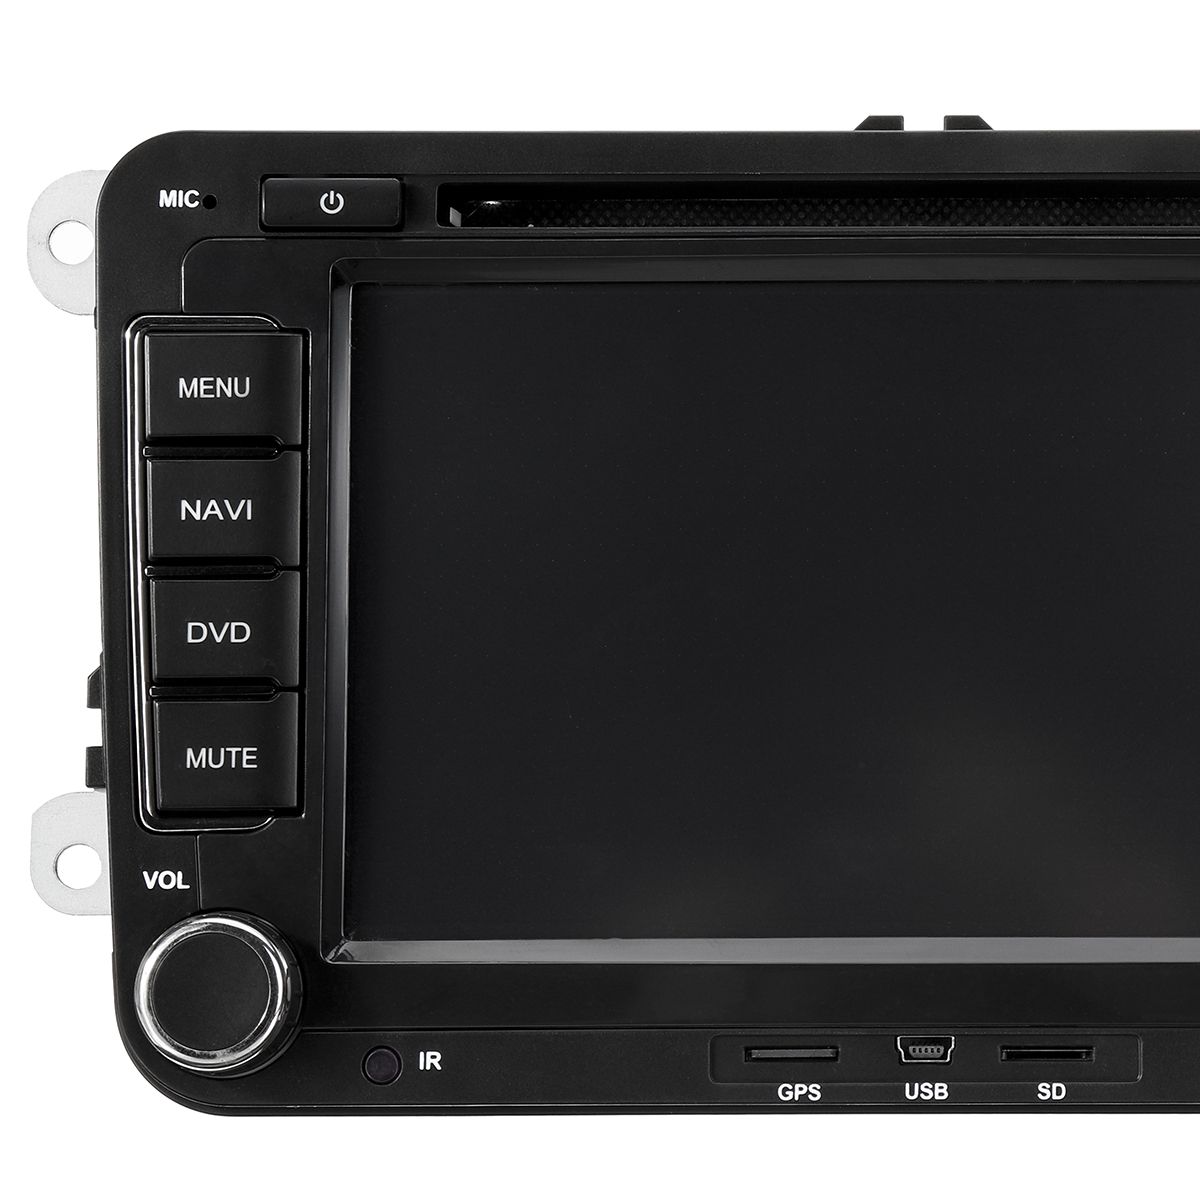 7-Inch-2-Din-For-Wince-60-Car-Stereo-Radio-DVD-MP5-Player-bluetooth-GPS-Hands-free-SD-FM-USB-With-Re-1614496